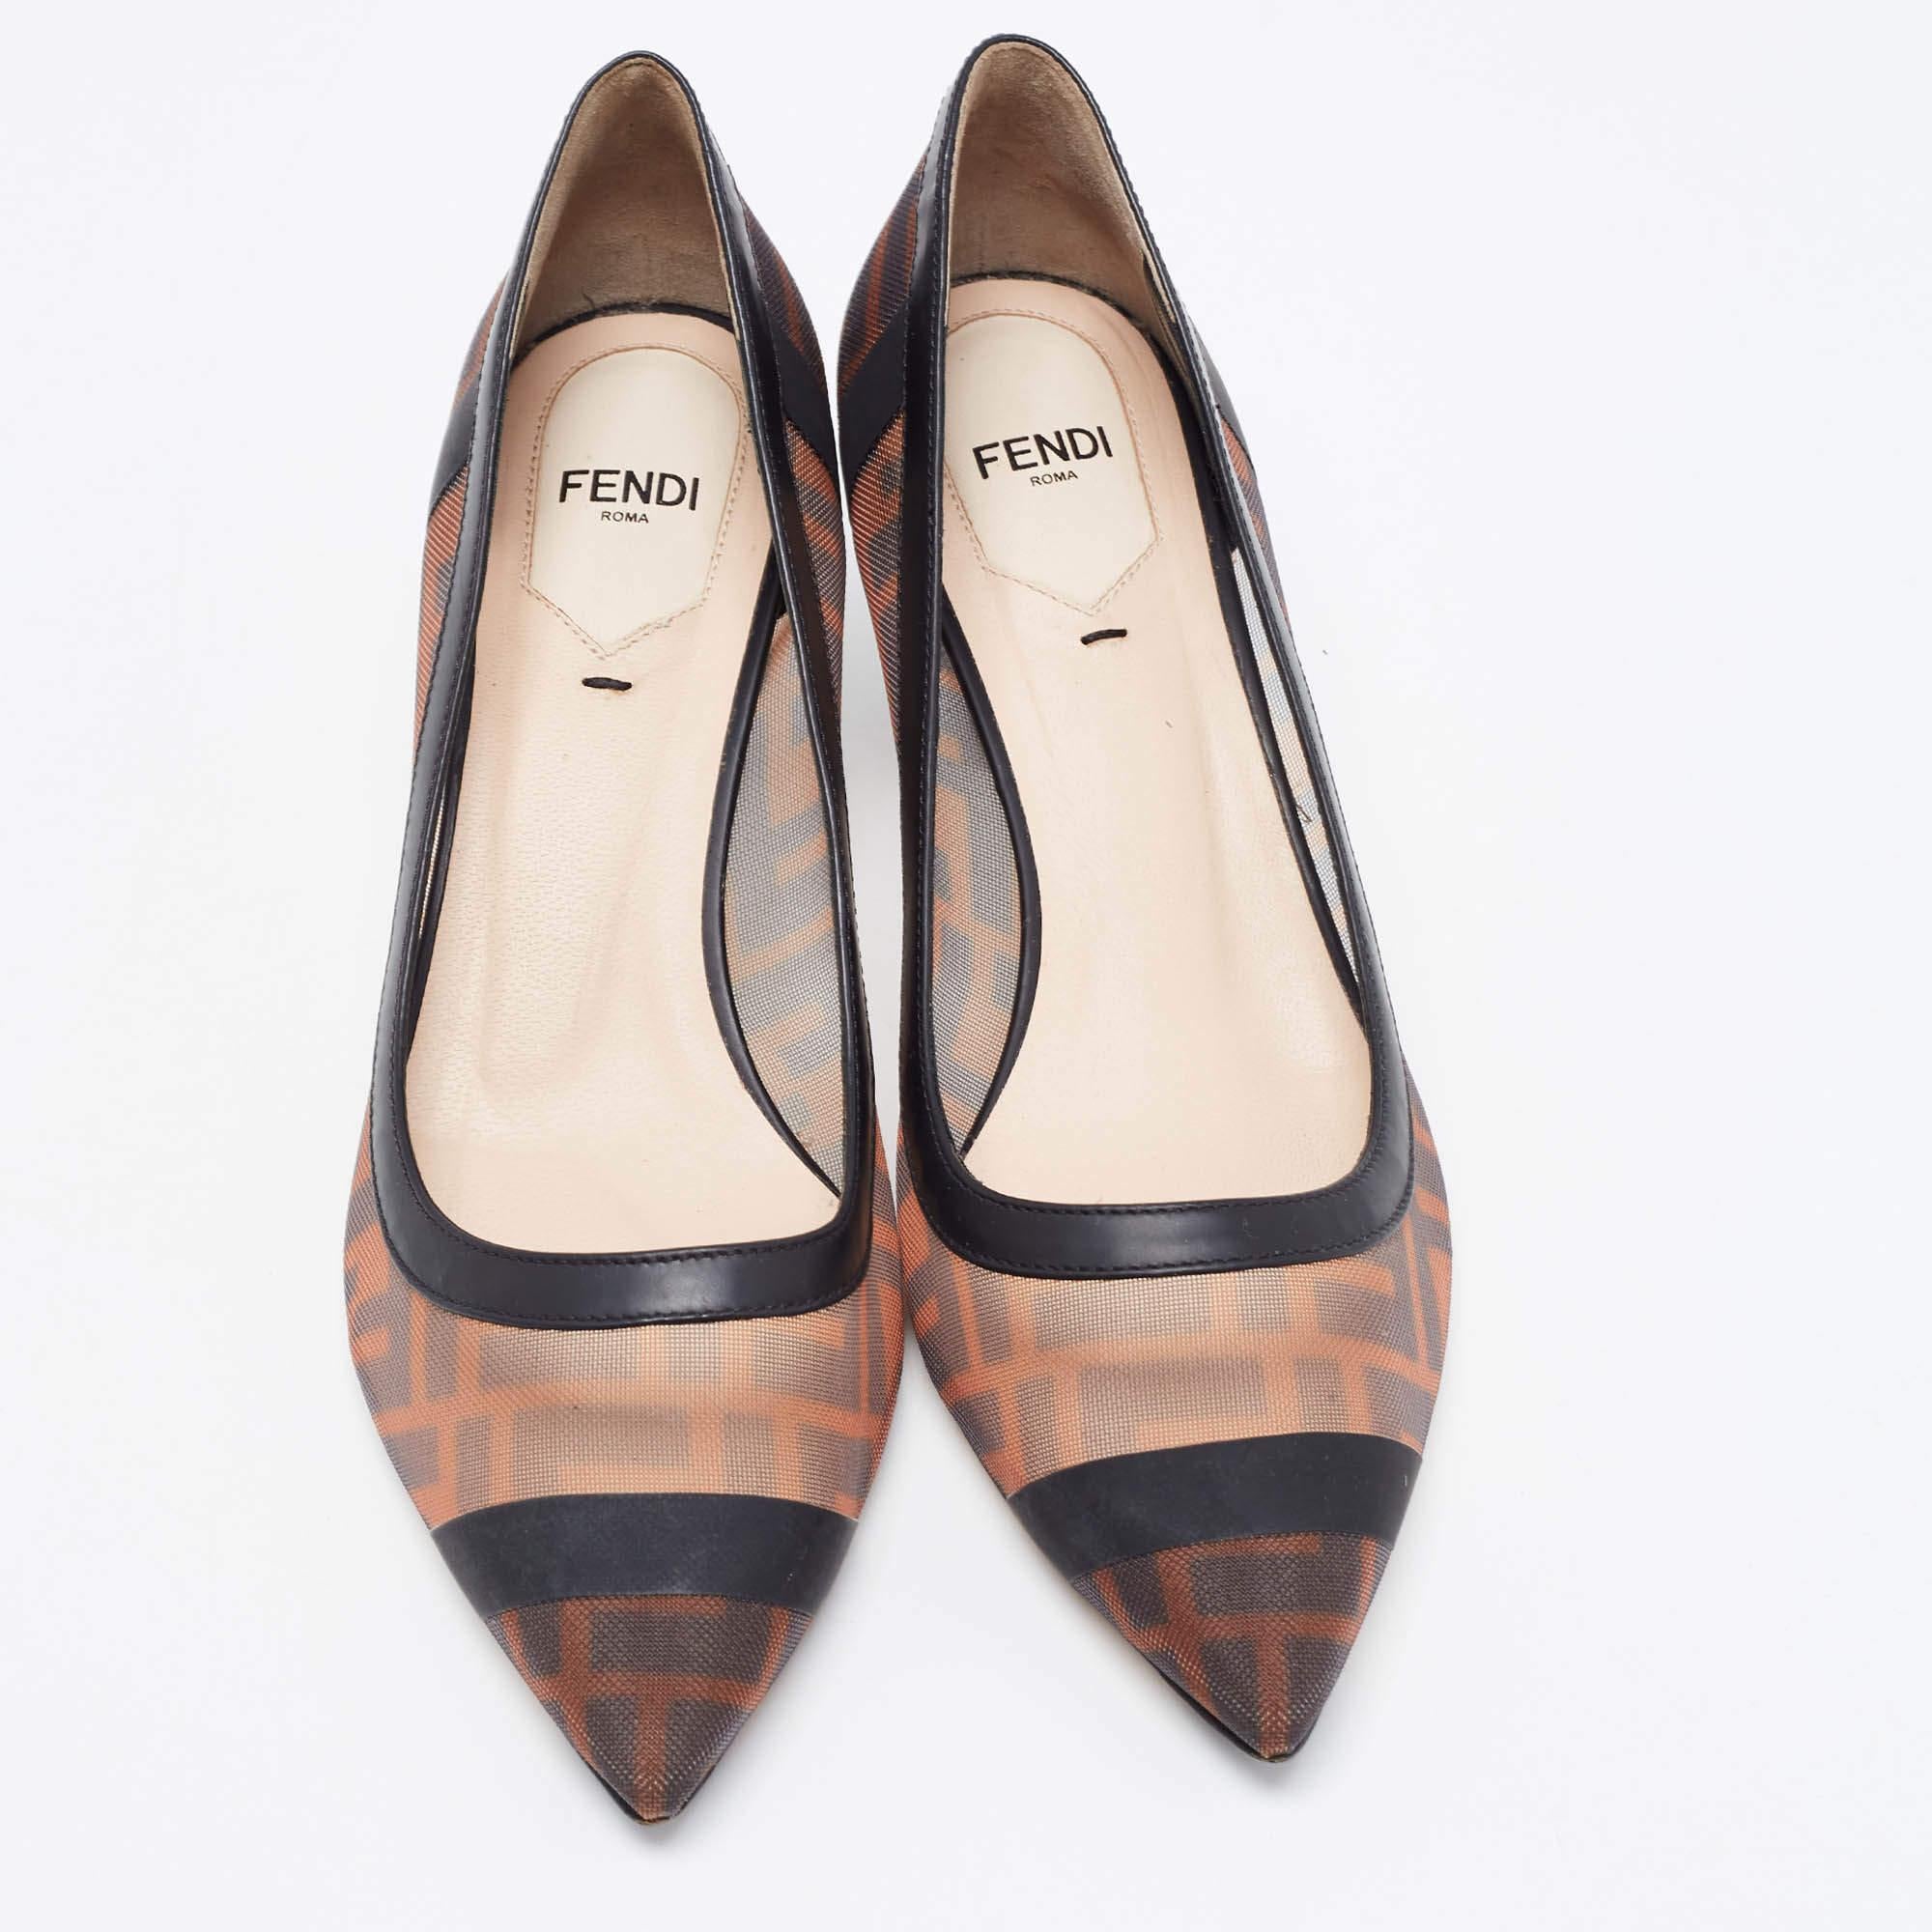 Exuding femininity and elegance, these pumps feature a chic silhouette with an attractive design. You can wear these pumps for a stylish look.

Includes: Original Dustbag, Original Box, Info Booklet
